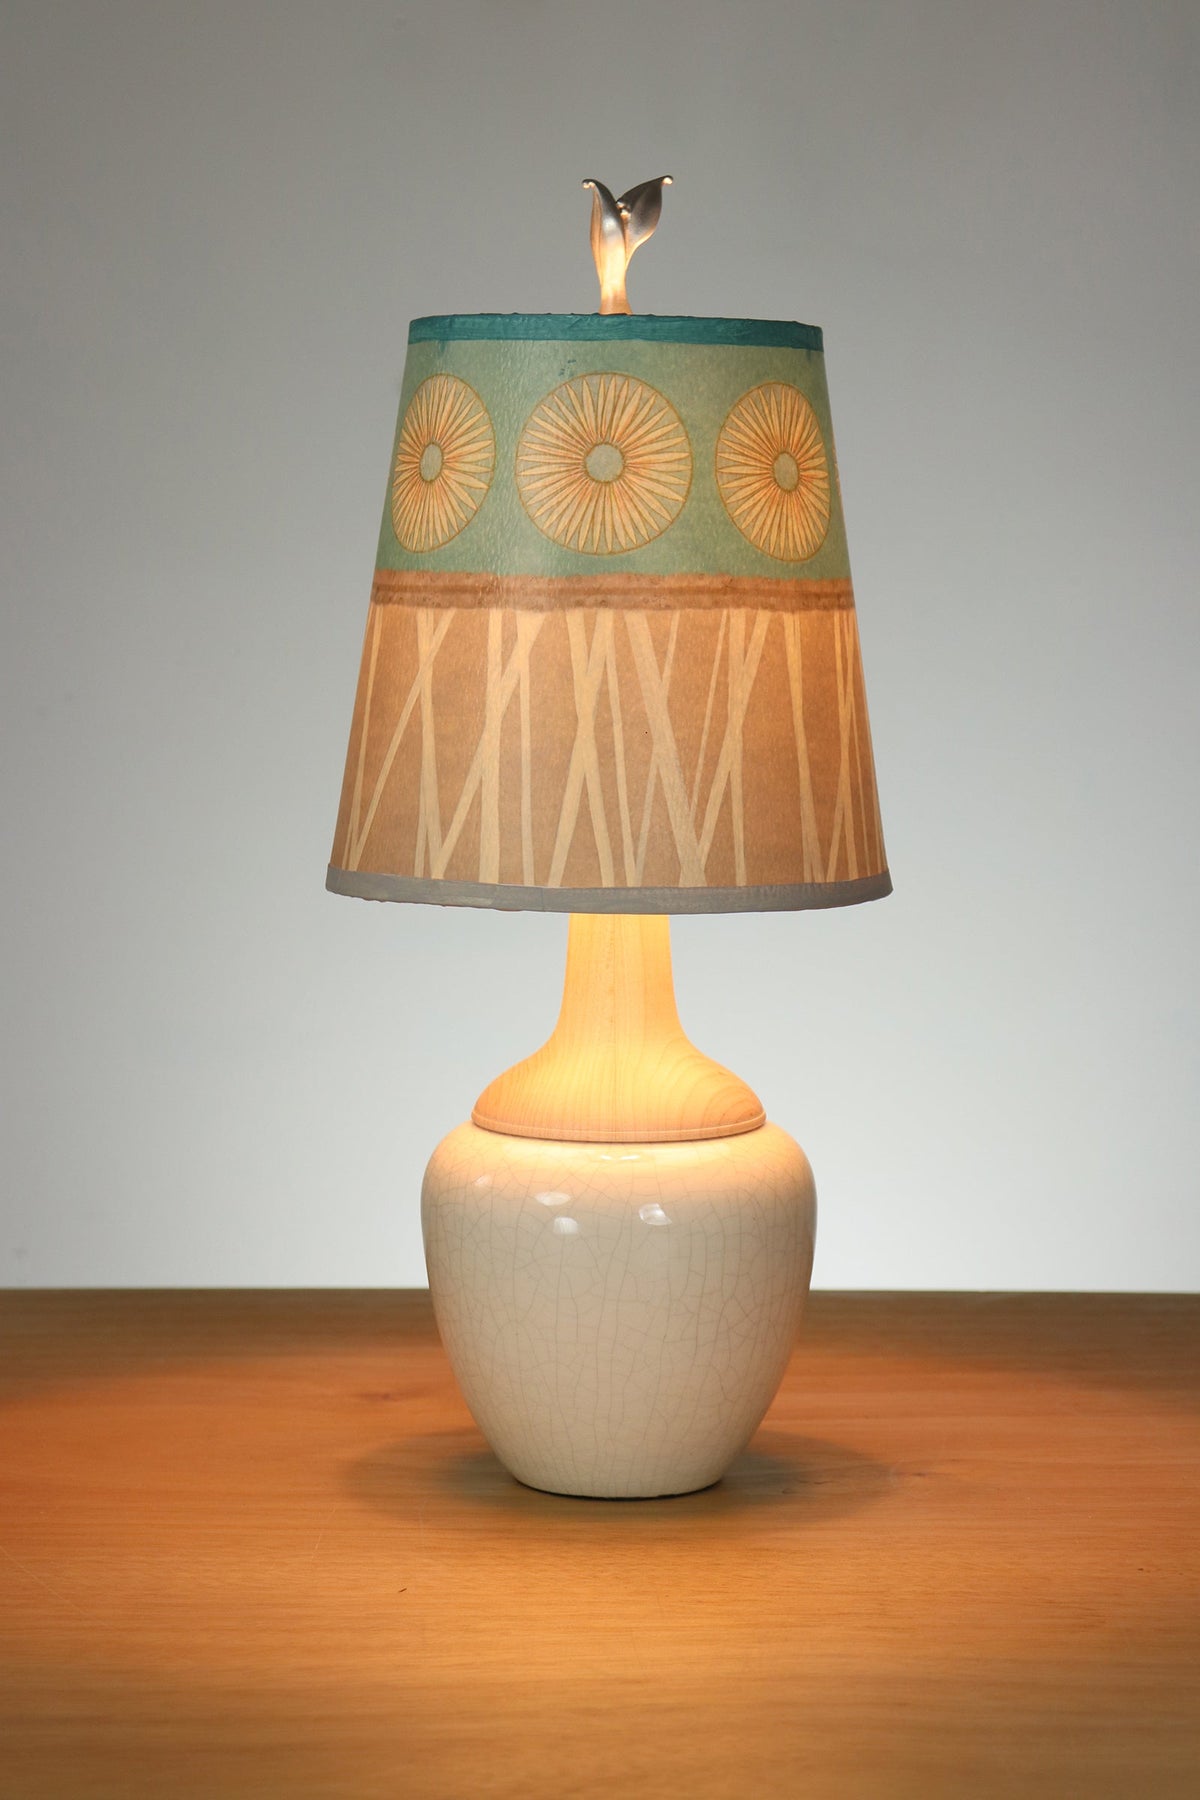 Limited Batch Ceramic Crackle Lamp with Small Drum Shade in Pool